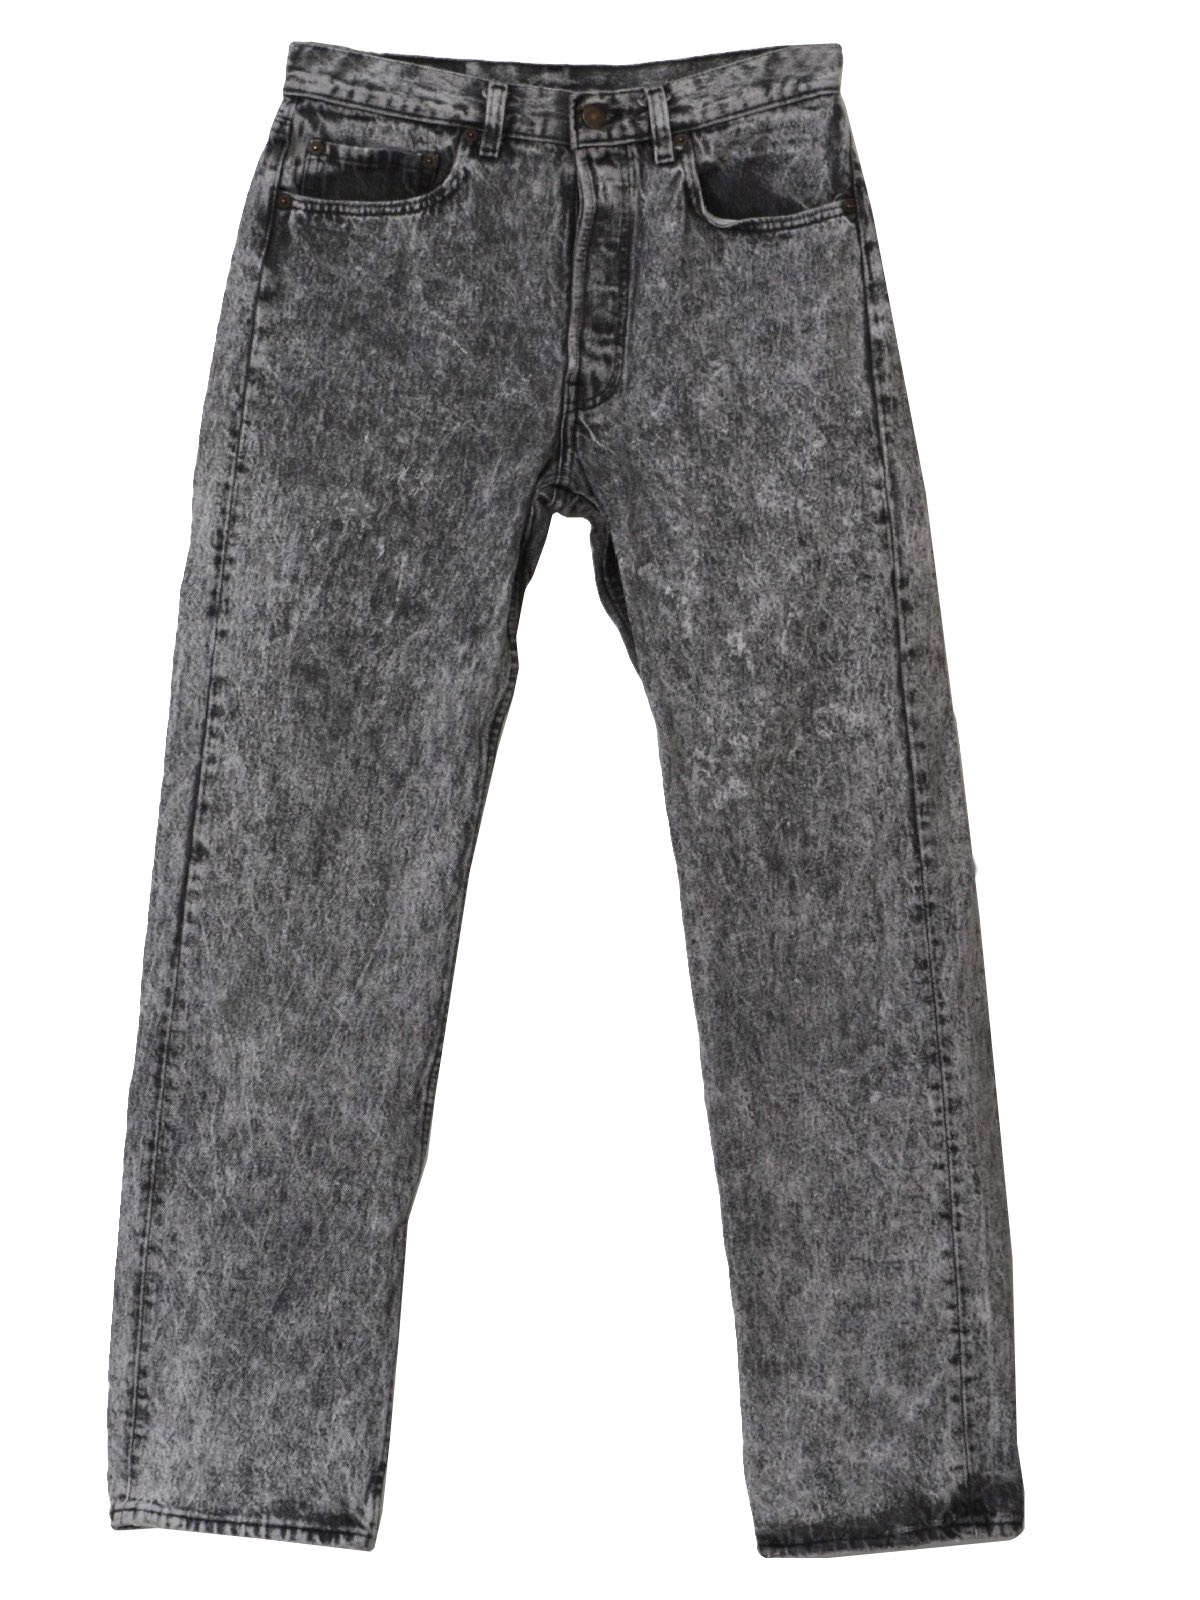 Eighties Vintage Pants: 80s -Levis 501- Mens shaded grey stone washed ...